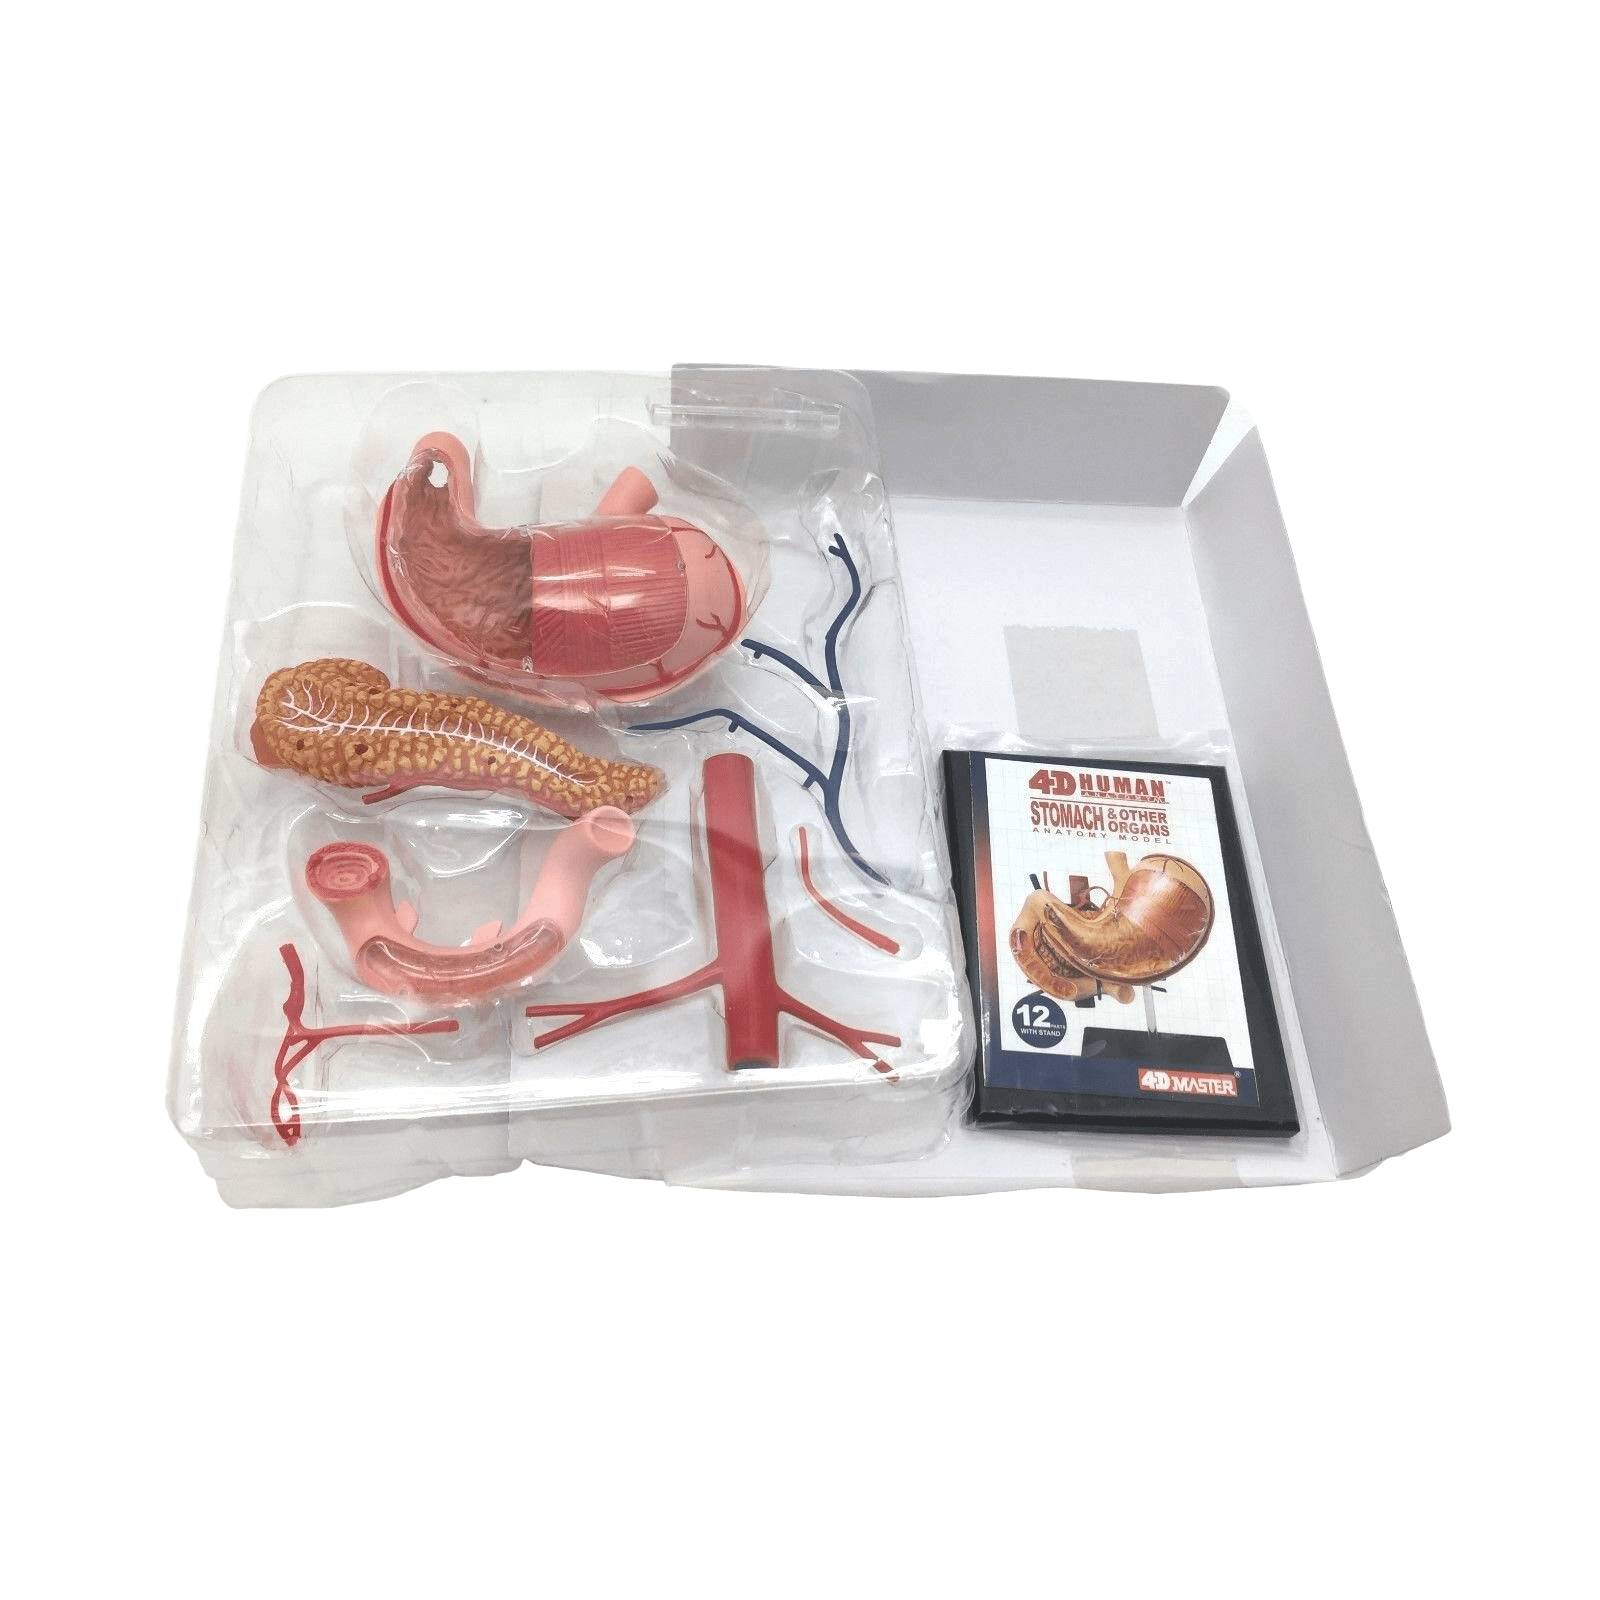 4D Medical model of the human stomach and other organs